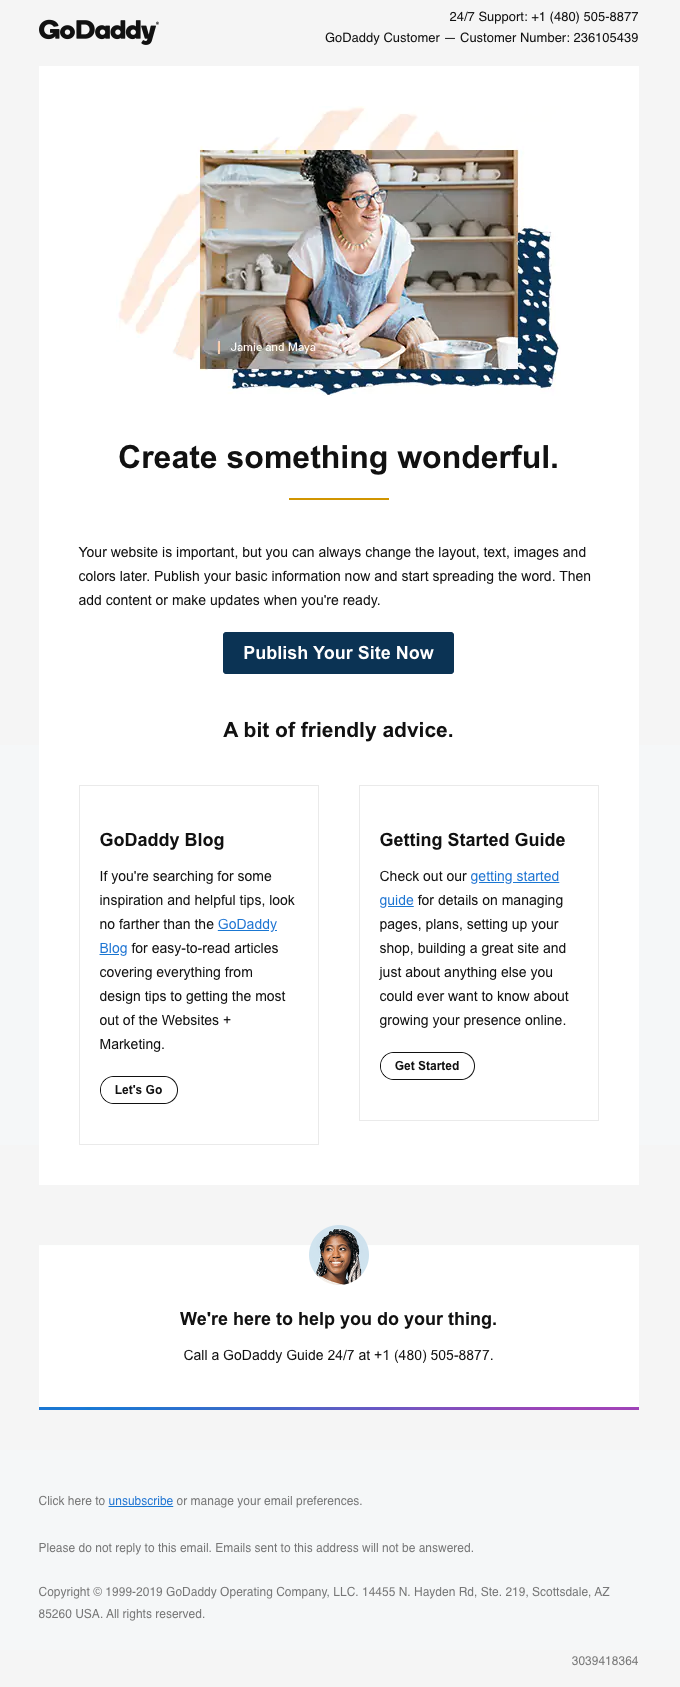 Don't feel ready to publish your site? Read this. - GoDaddy Email Newsletter